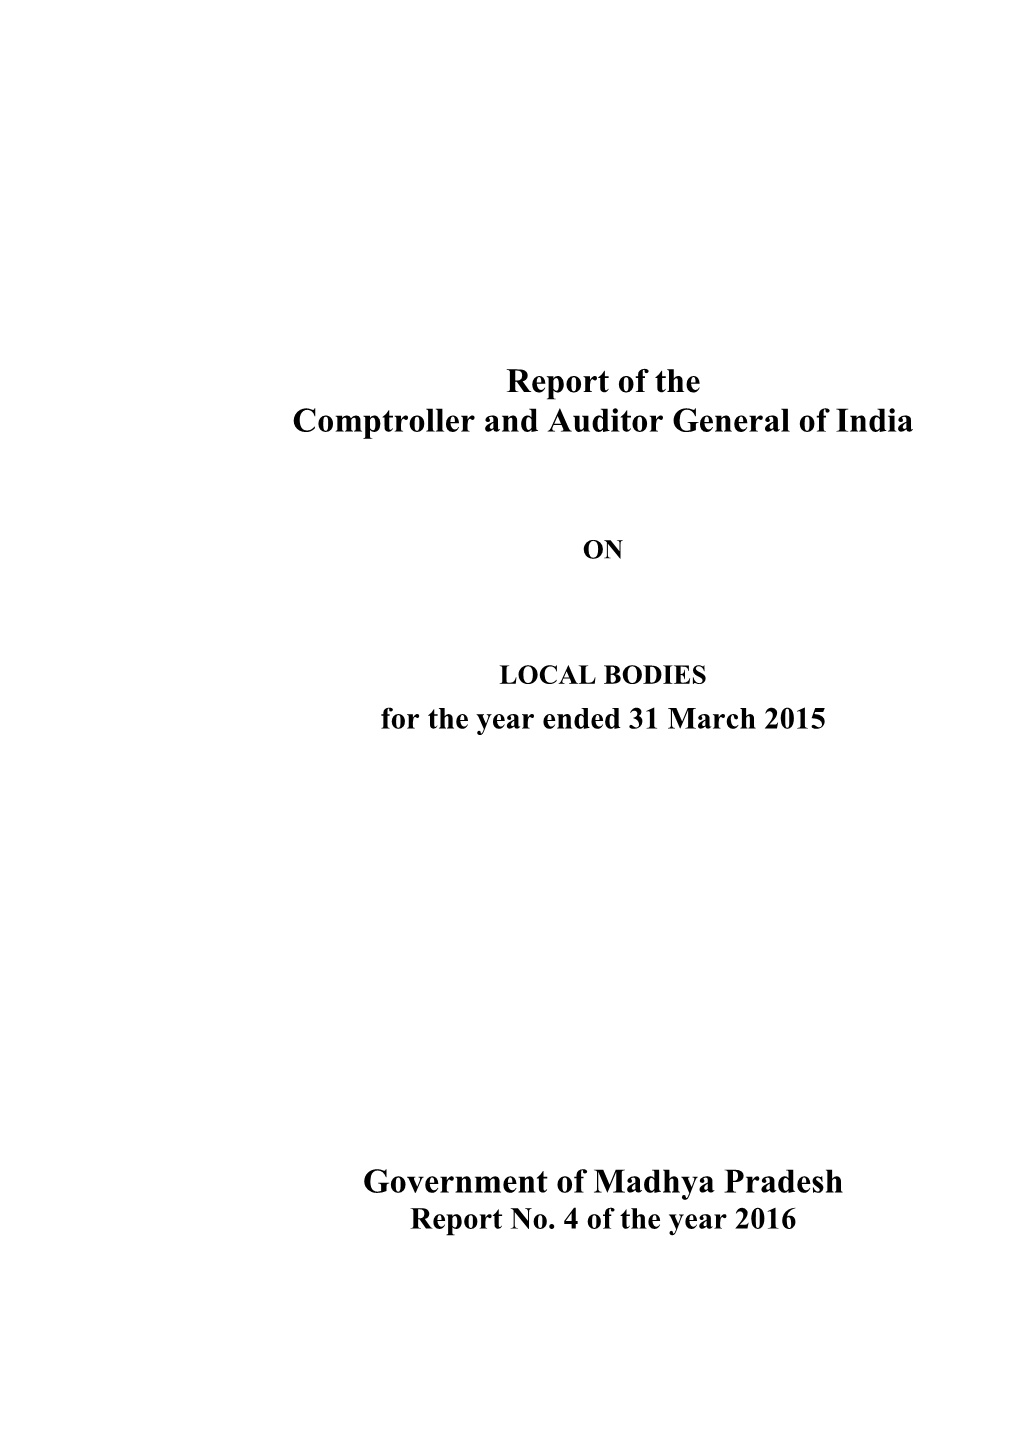 Report of the Comptroller and Auditor General of India Government